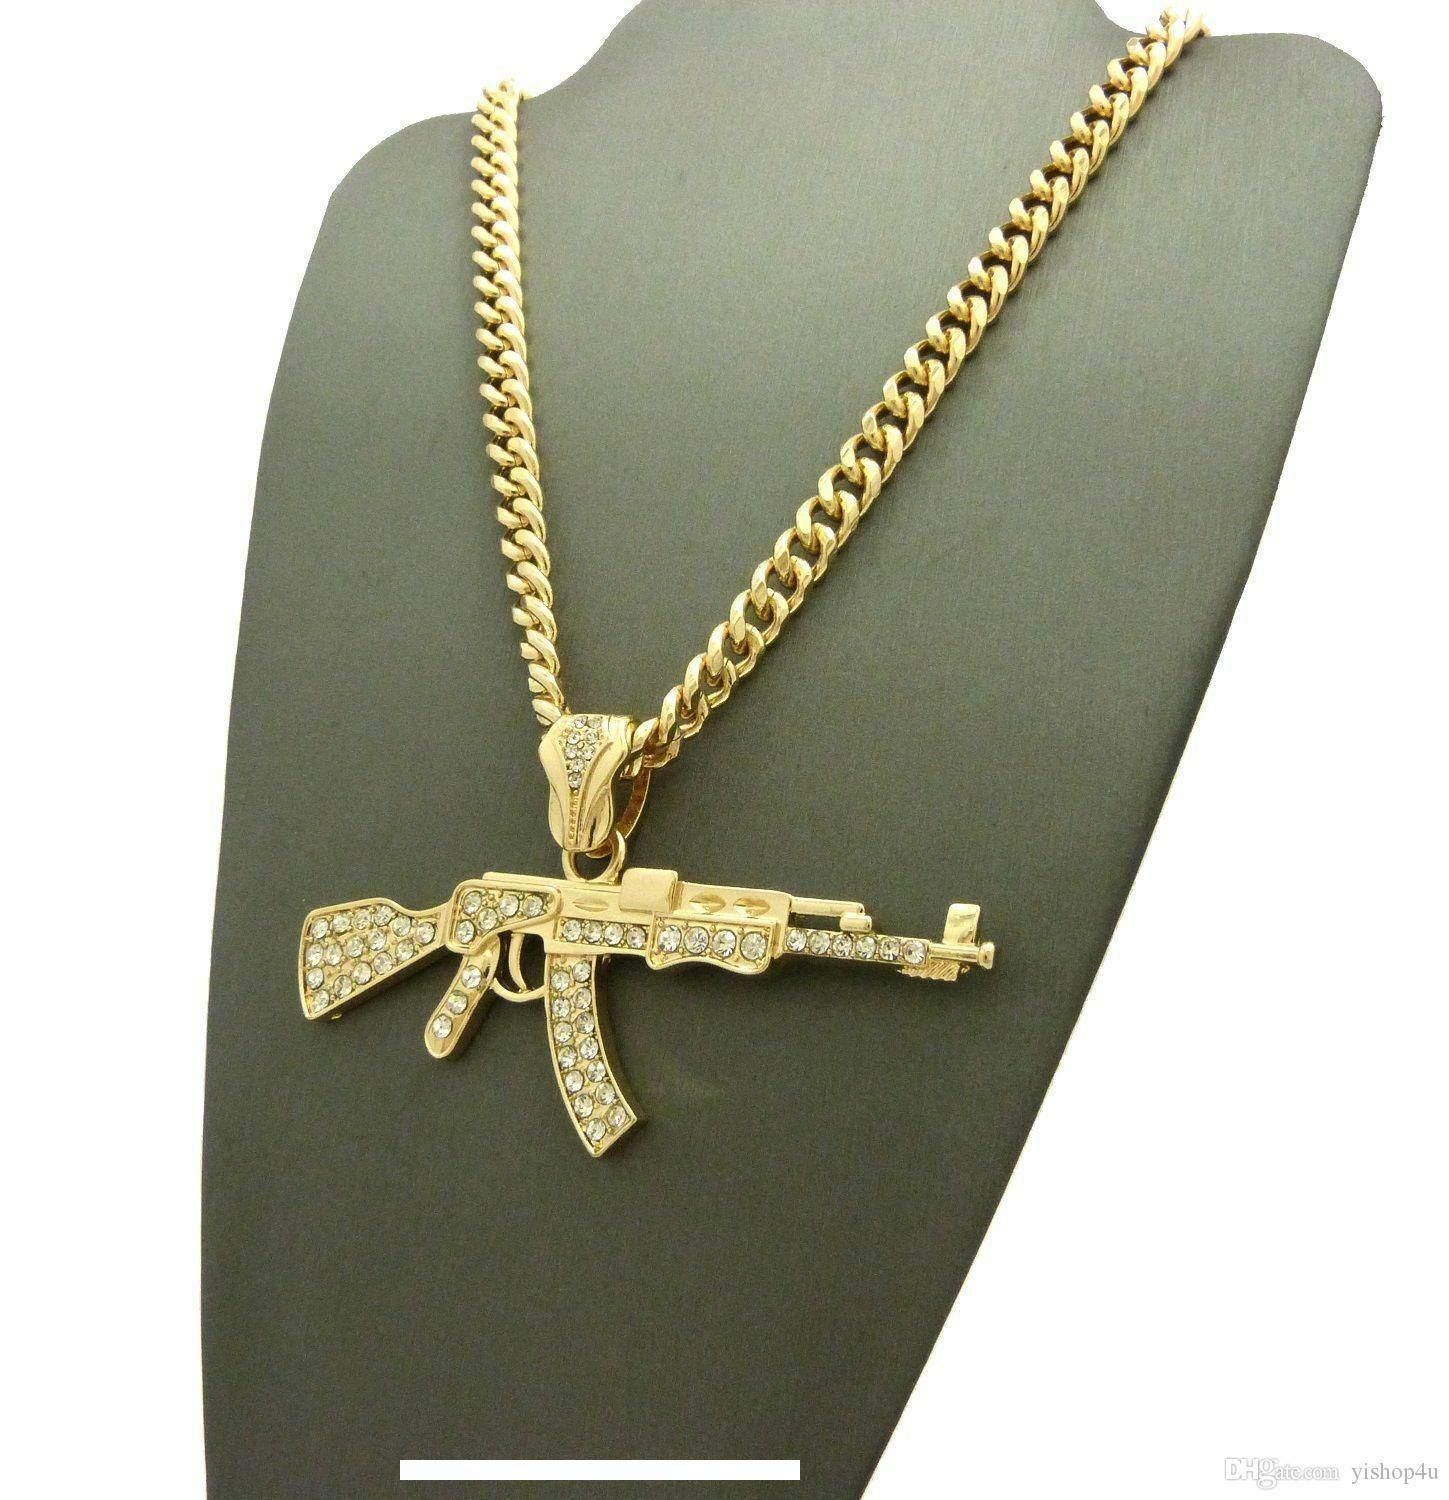 Wholesale NEW ICED 14K GOLD PLATED MACHINE GUN AK 47 PENDANT NECKLACE W 6mm 24 Cuban Chain MENS ...